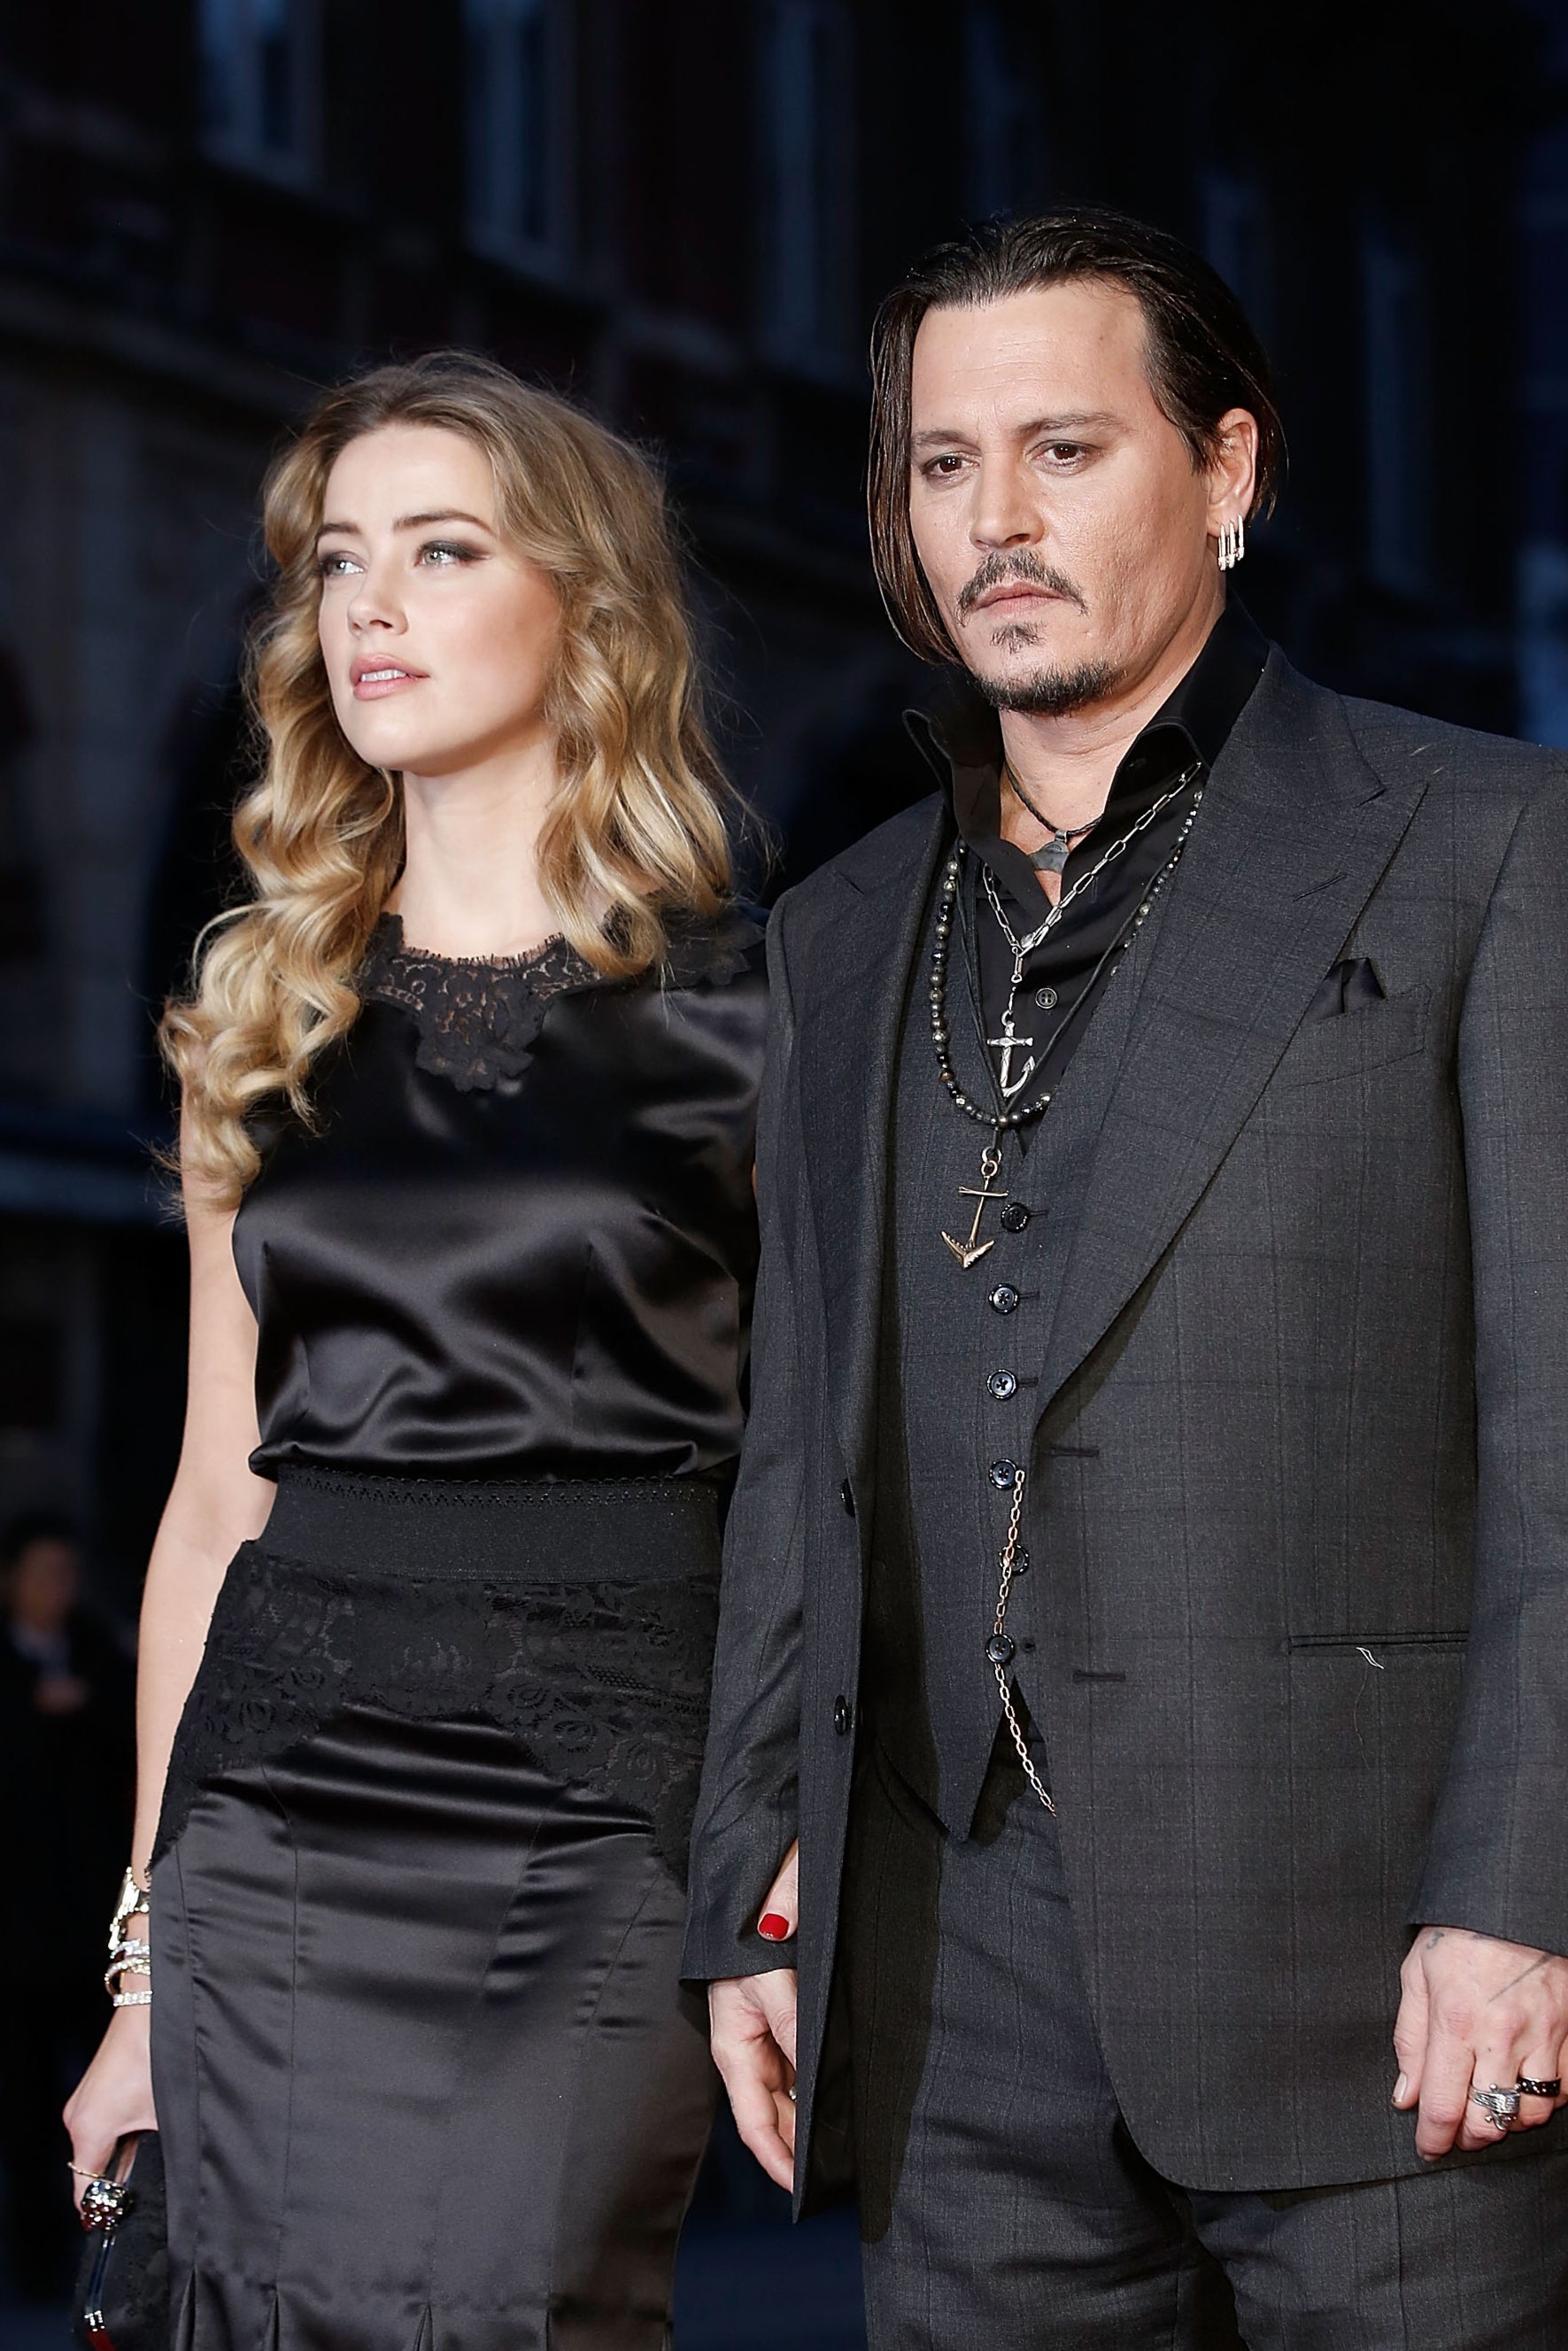 Heard and Depp at a 2015 film premiere, years before their contentious court battles